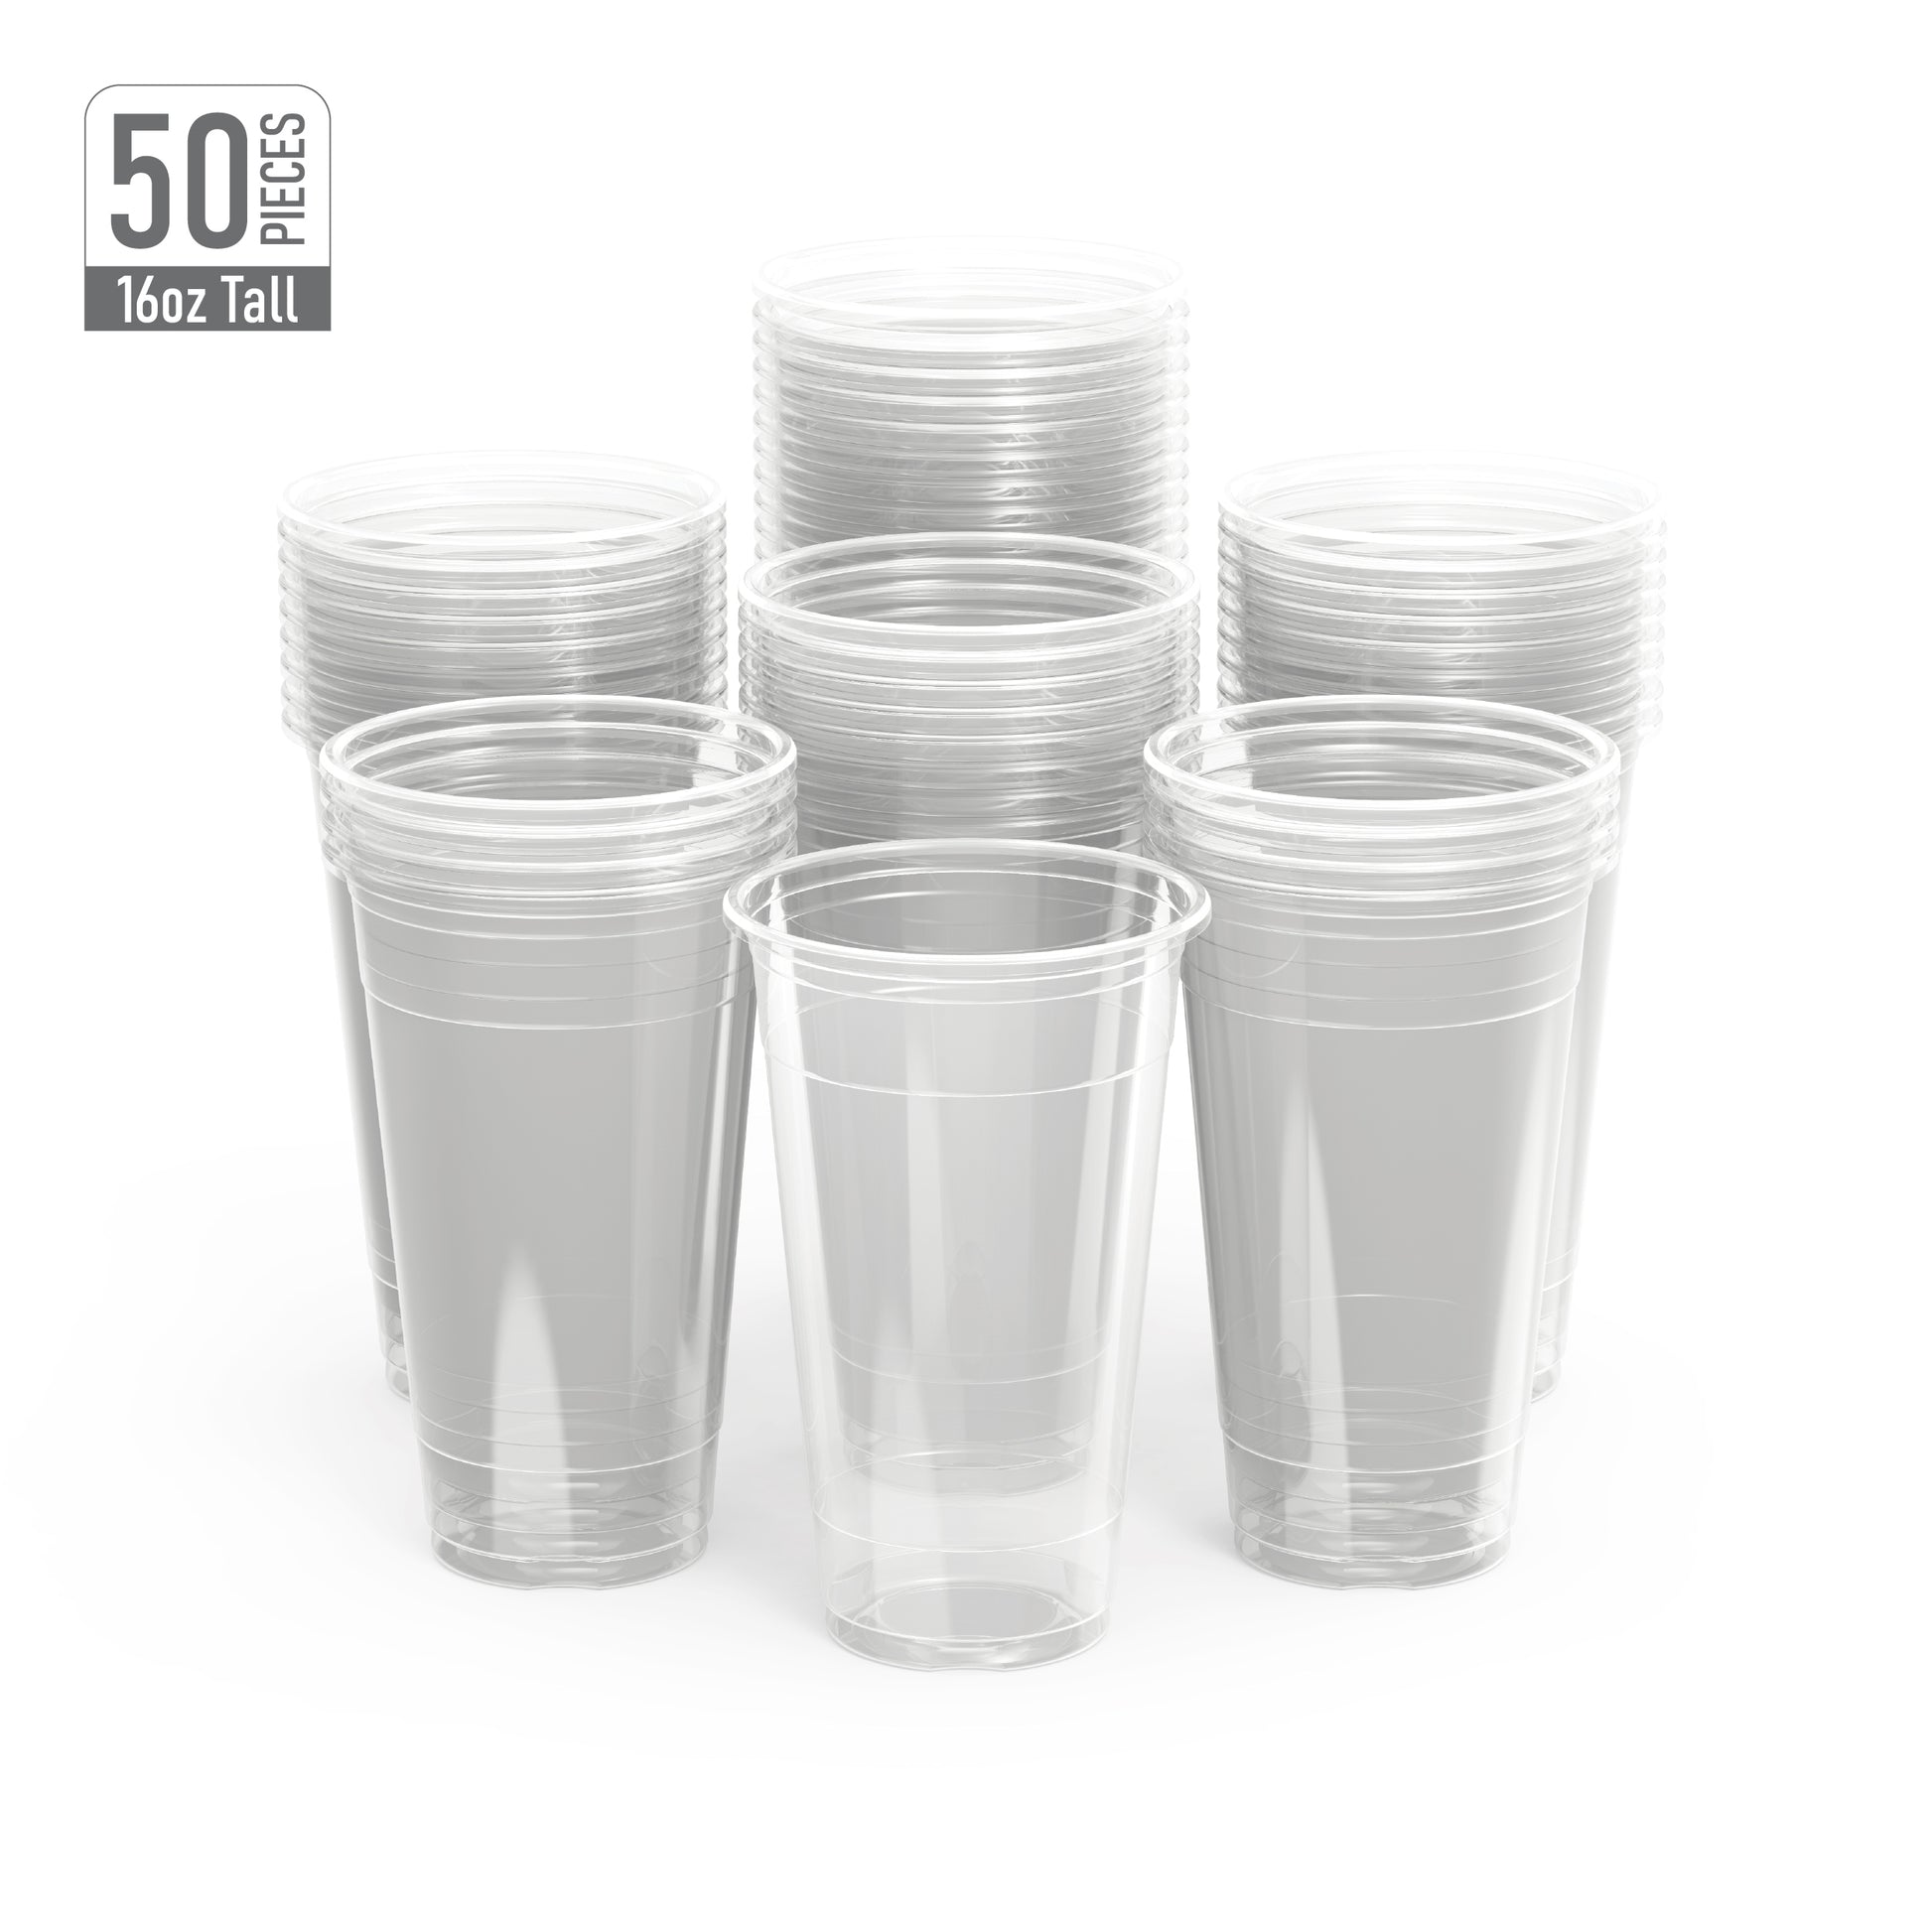 16 oz Clear Plastic Tall Cups Pack of 506 oz Clear Plastic Tall Cups